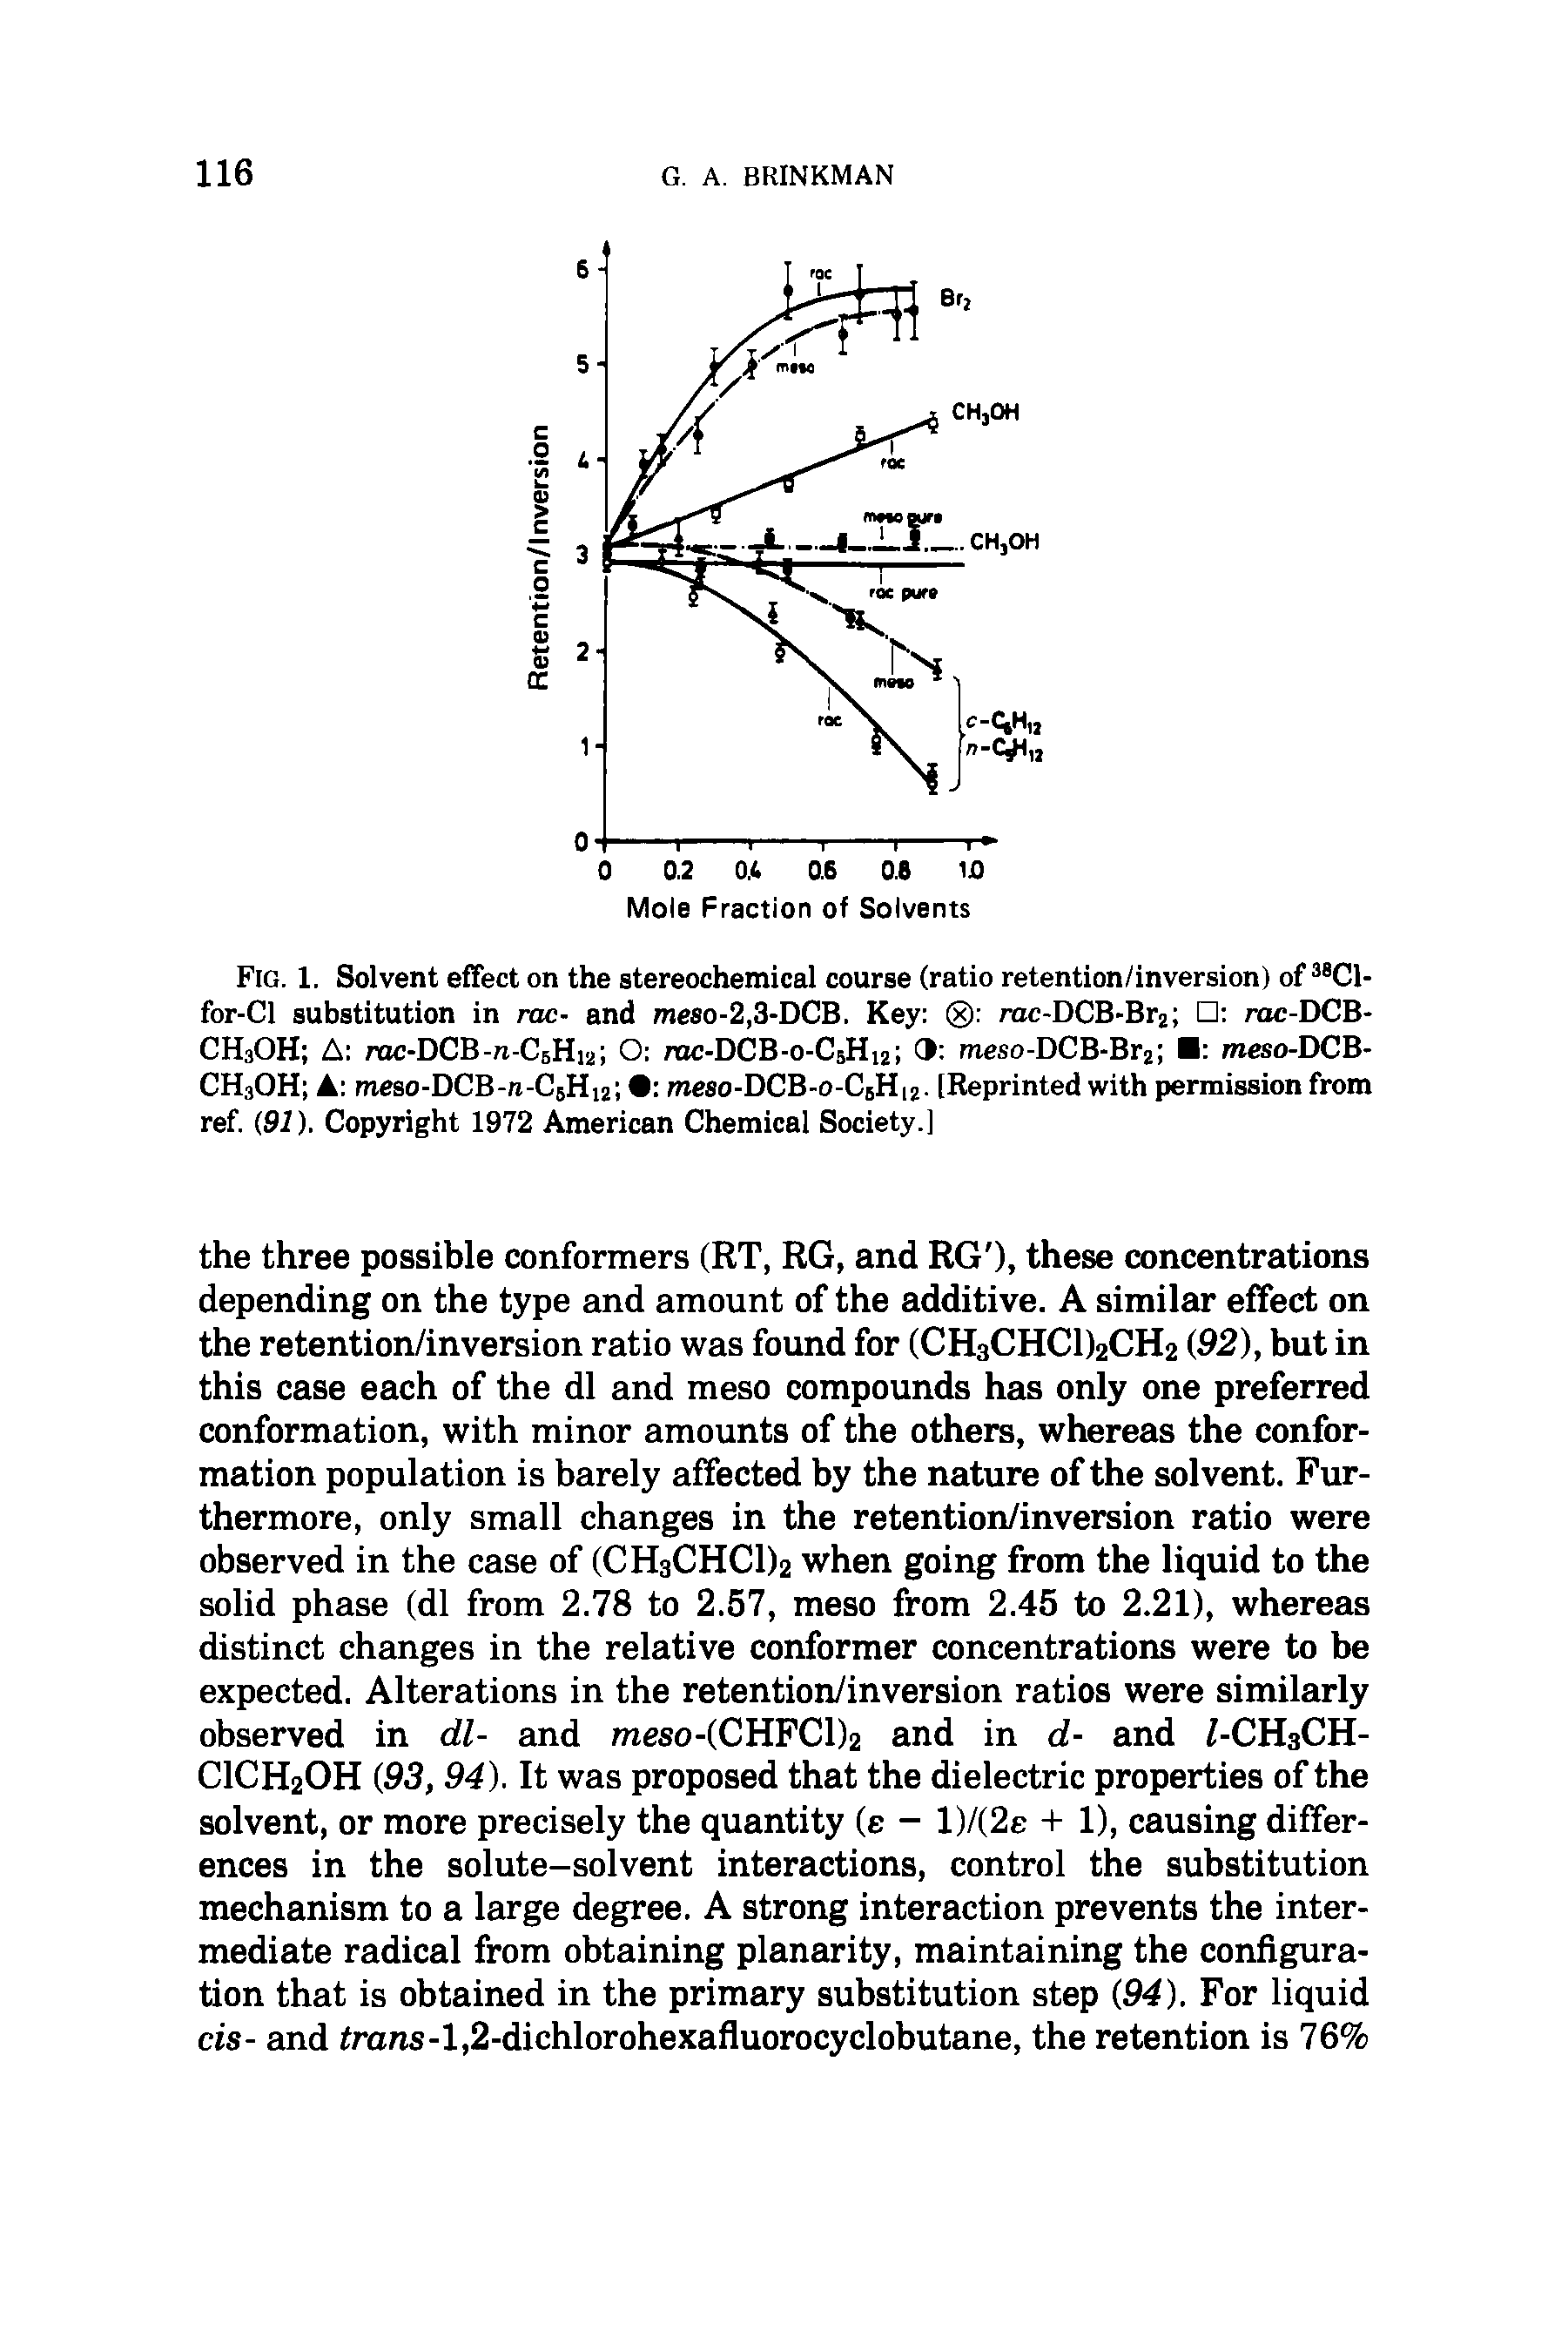 Fig. 1. Solvent effect on the stereochemical course (ratio retention/inversion) of 38C1-for-Cl substitution in me- and meso-2,3-DCB. Key rac-DCB-Br2 rac-DCB-CH3OH A rac-DCB-rc-CsHia O rac-DCB-o-C5Hi2 9 meso-DCB-Br2 meso-DCB-CH3OH A meso-DCB-n-C5H12 meso-DCB-o-C5H12. [Reprinted with permission from ref. (91). Copyright 1972 American Chemical Society.]...